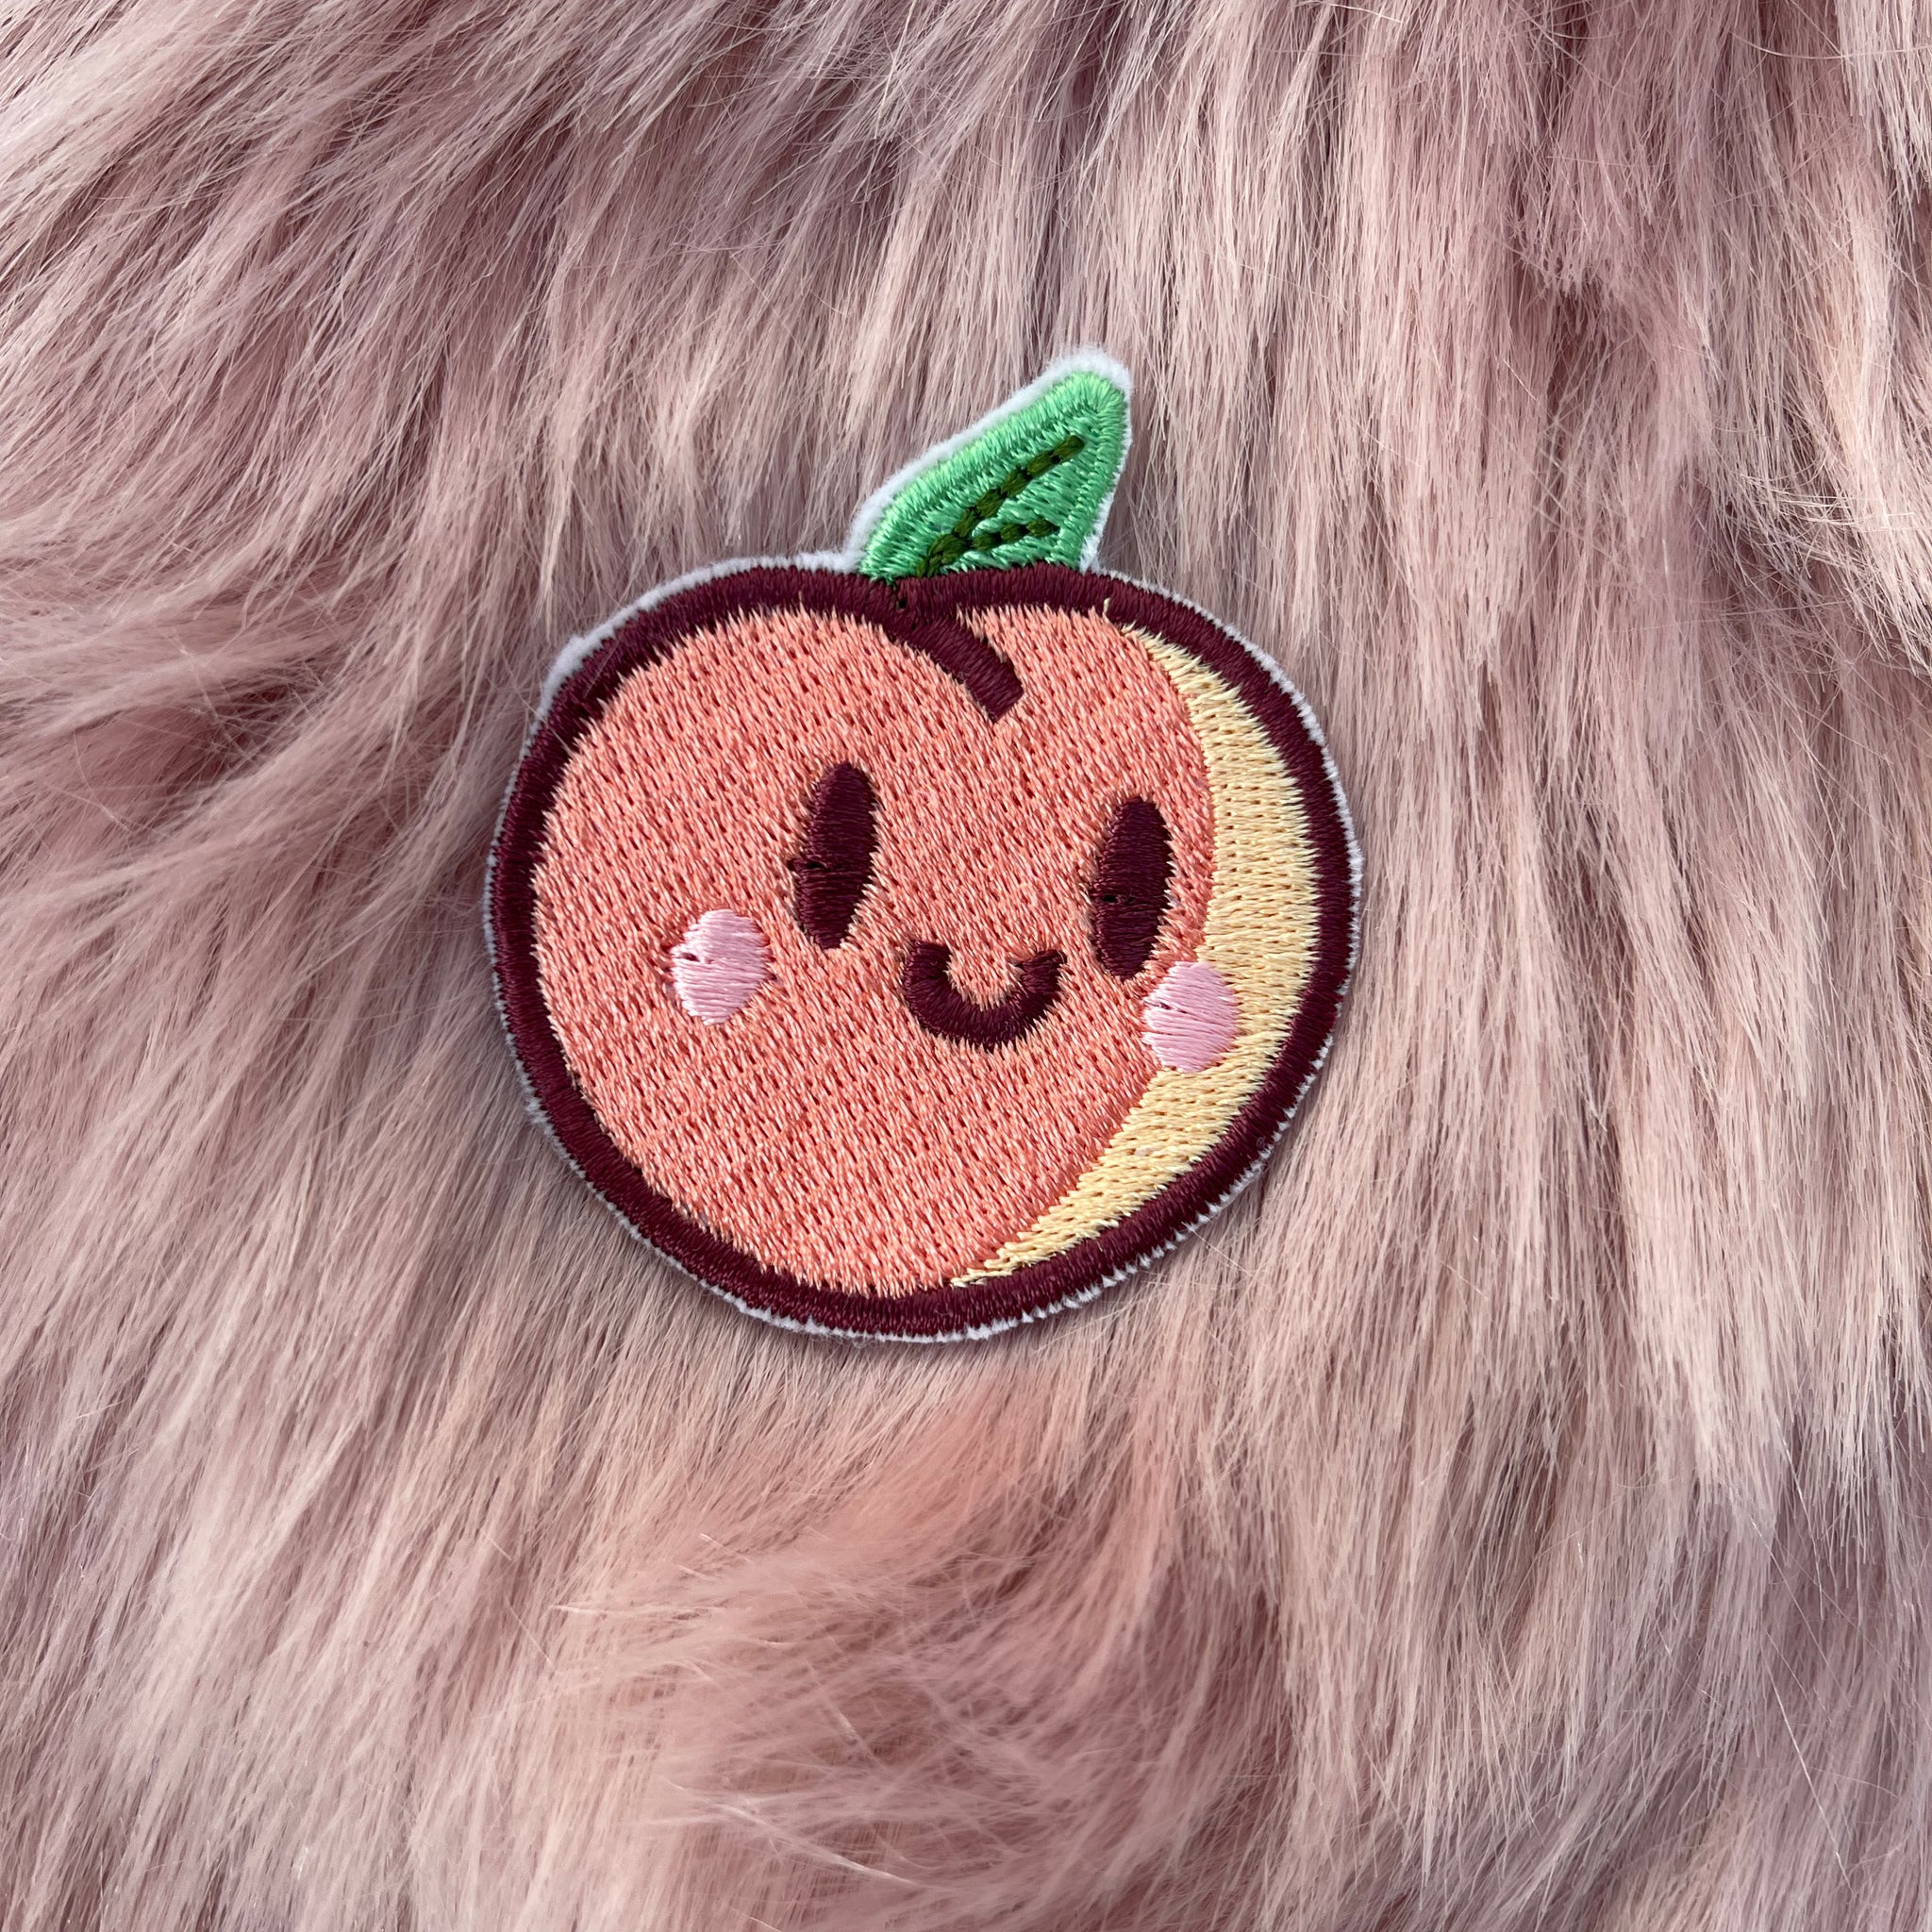 Cute Peach Iron On Embroidery Patch